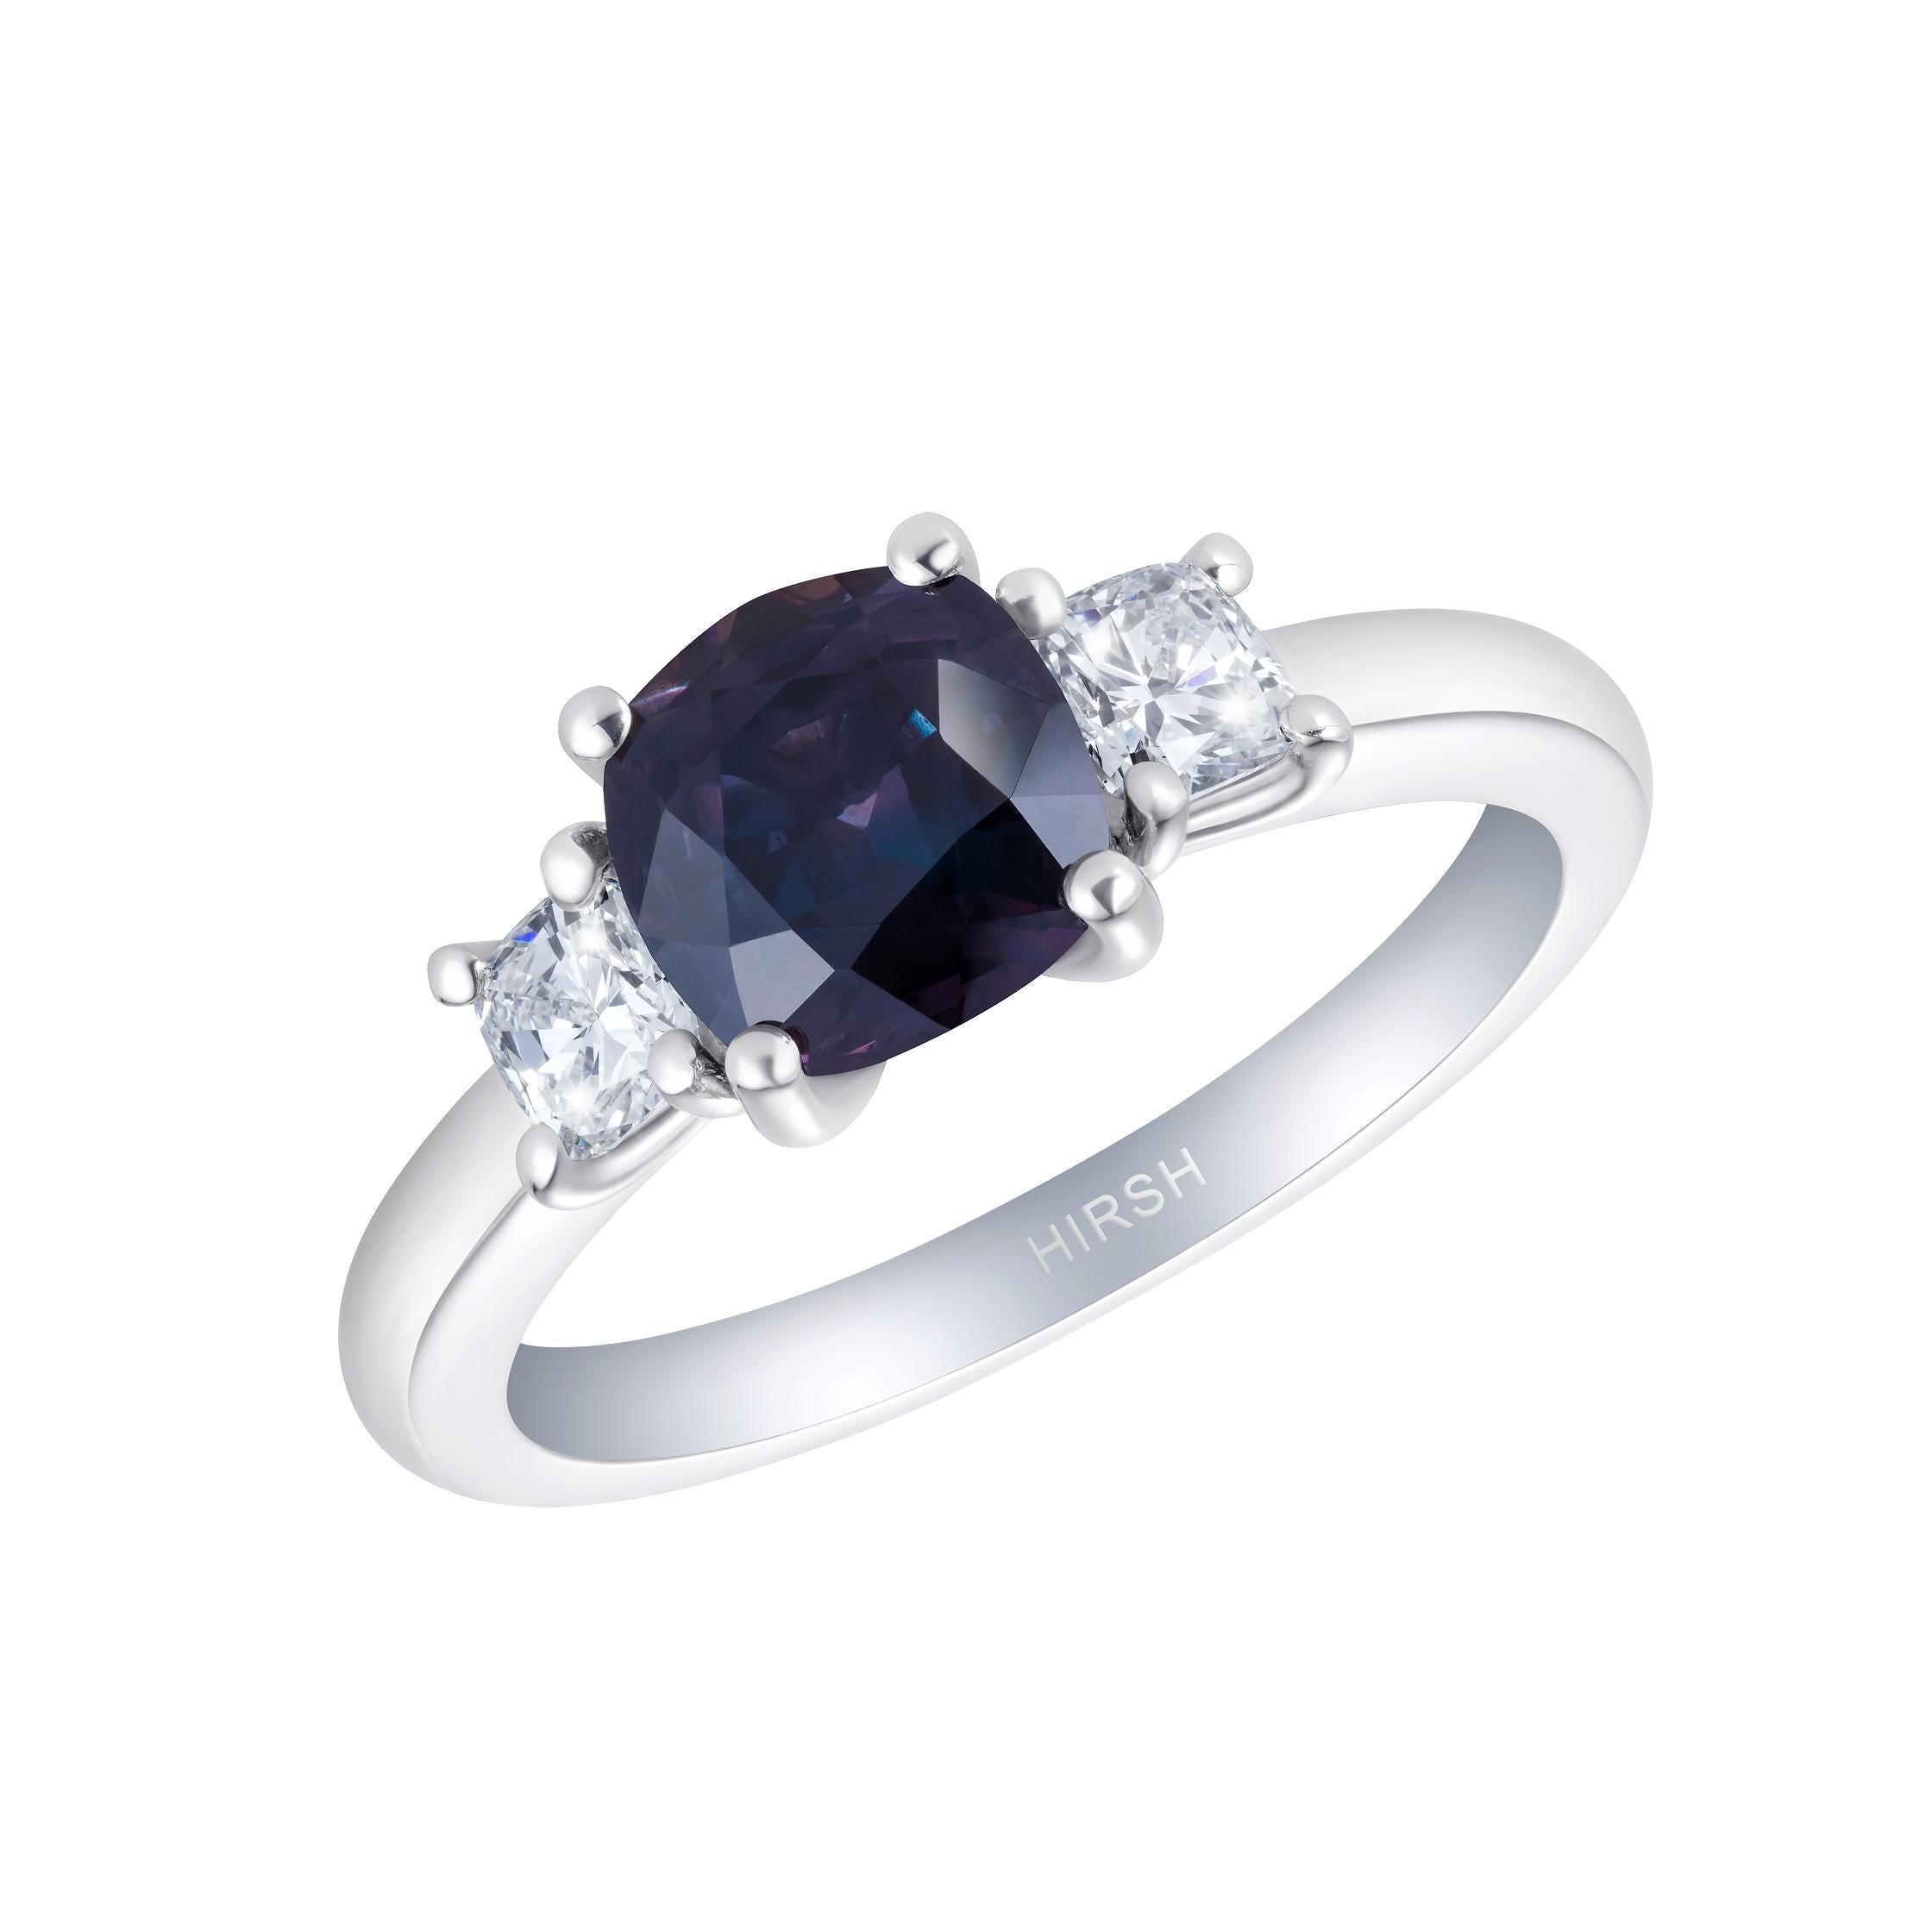 A rare and beautiful colour-change sapphire set amongst two cushion cut diamonds in our Hirsh Trio setting. The sapphire is purple in incandescent light and has flashes of green in daylight.

- 1.83 carat colour-change sapphire
- 2 cushion cut